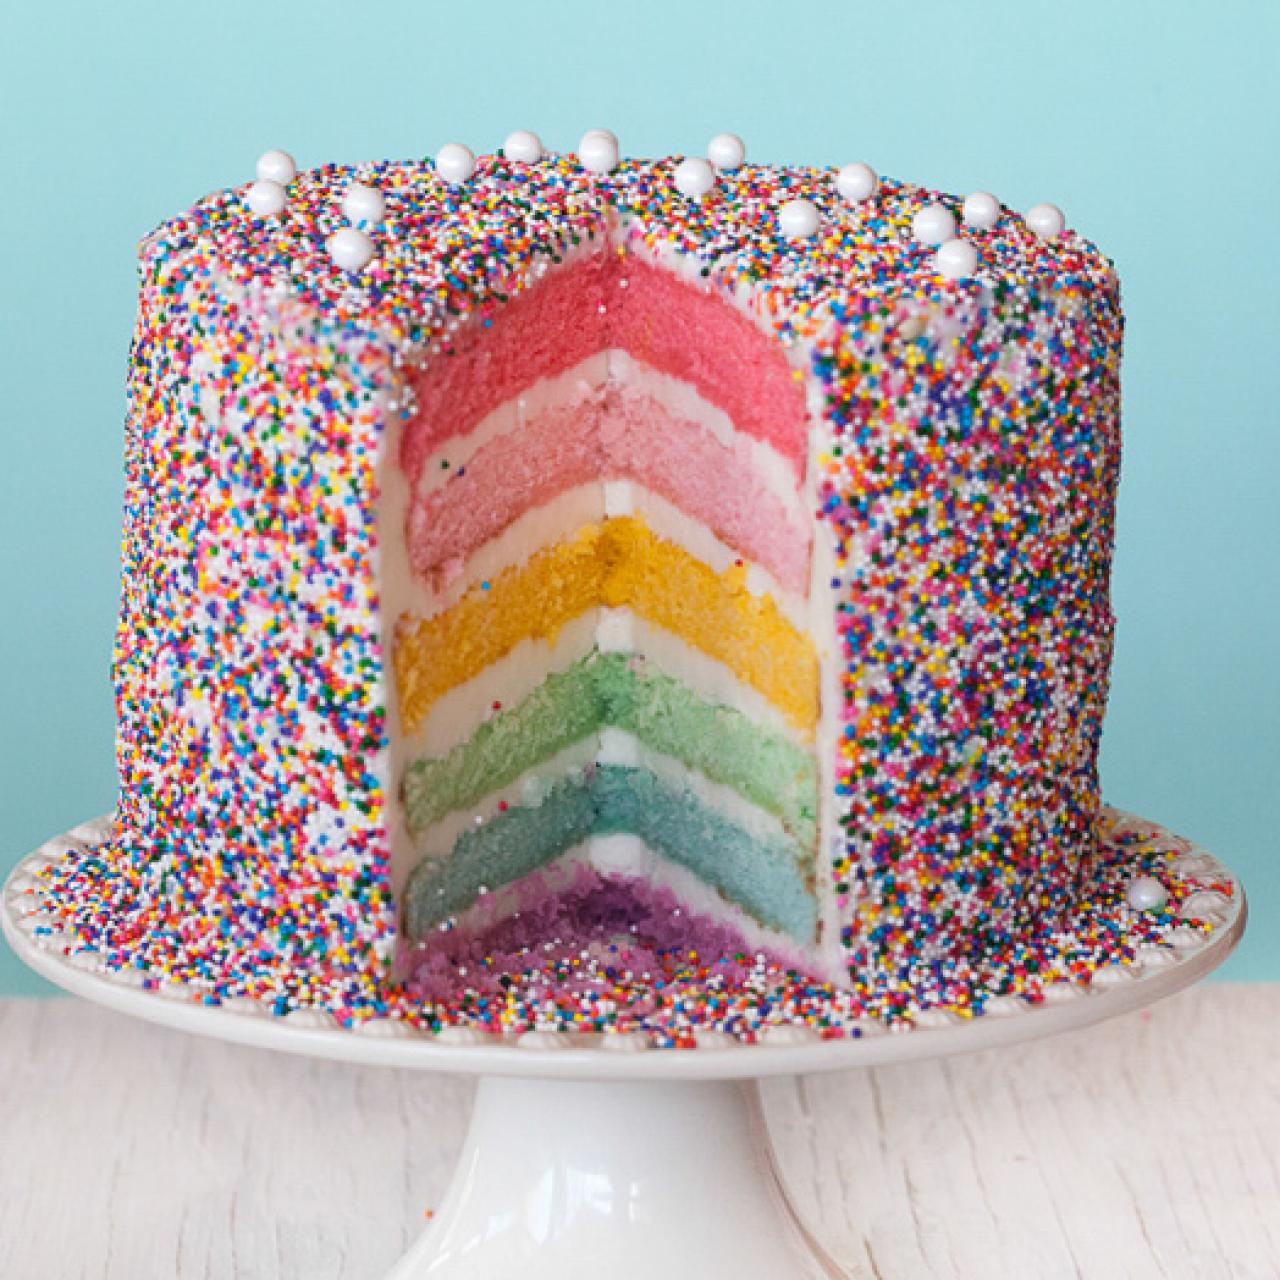 57 Best Layer Cake Recipes - How To Make Layer Cakes